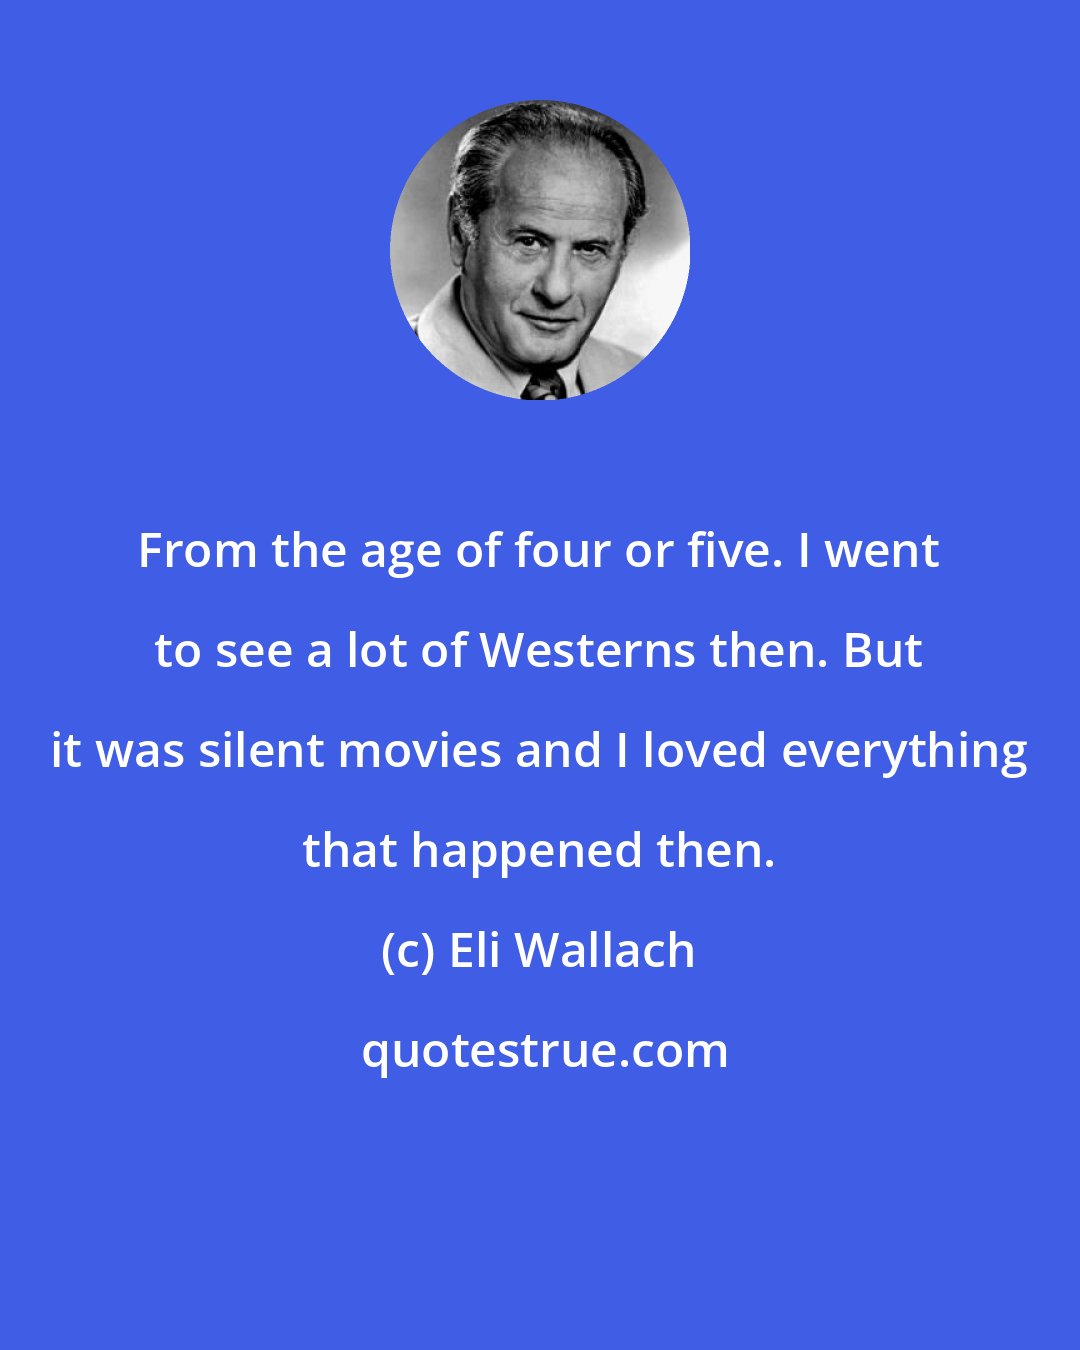 Eli Wallach: From the age of four or five. I went to see a lot of Westerns then. But it was silent movies and I loved everything that happened then.